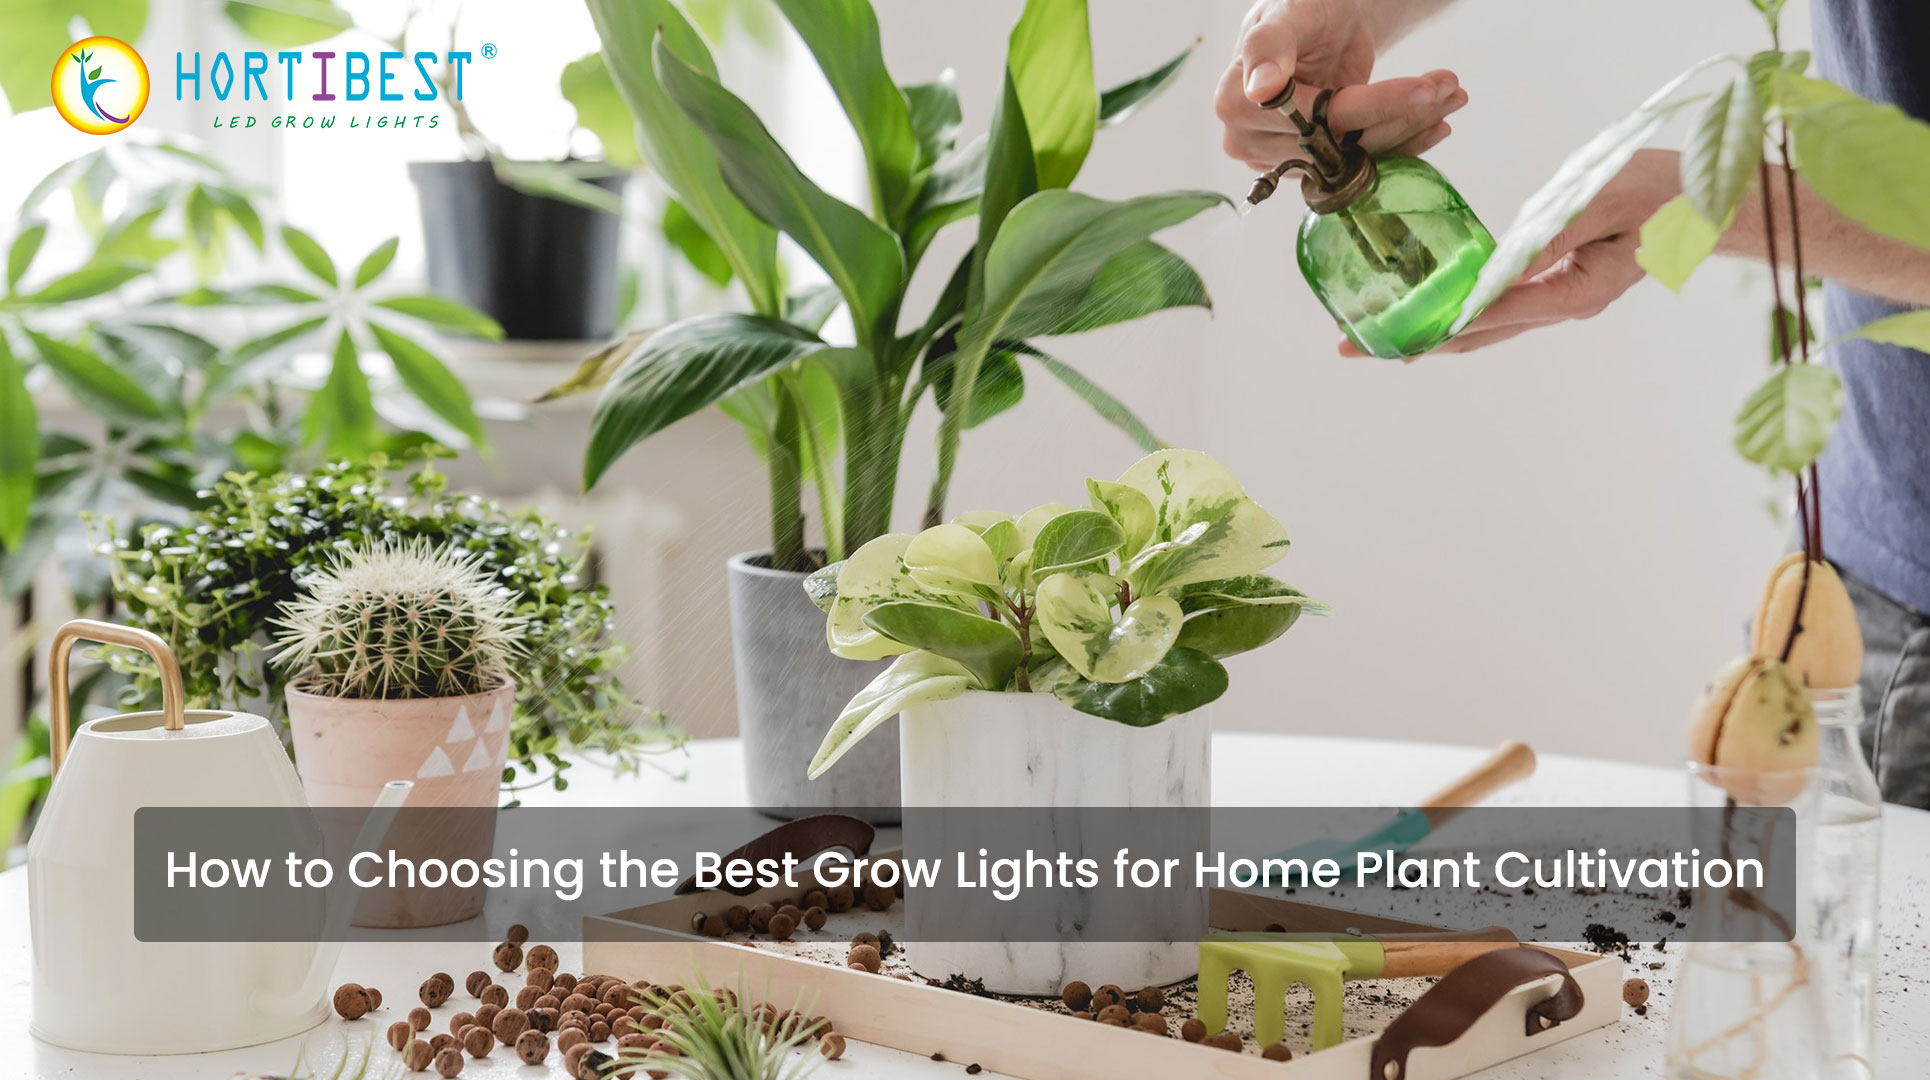 How to Choosing the Best Grow Lights for Home Plant Cultivation